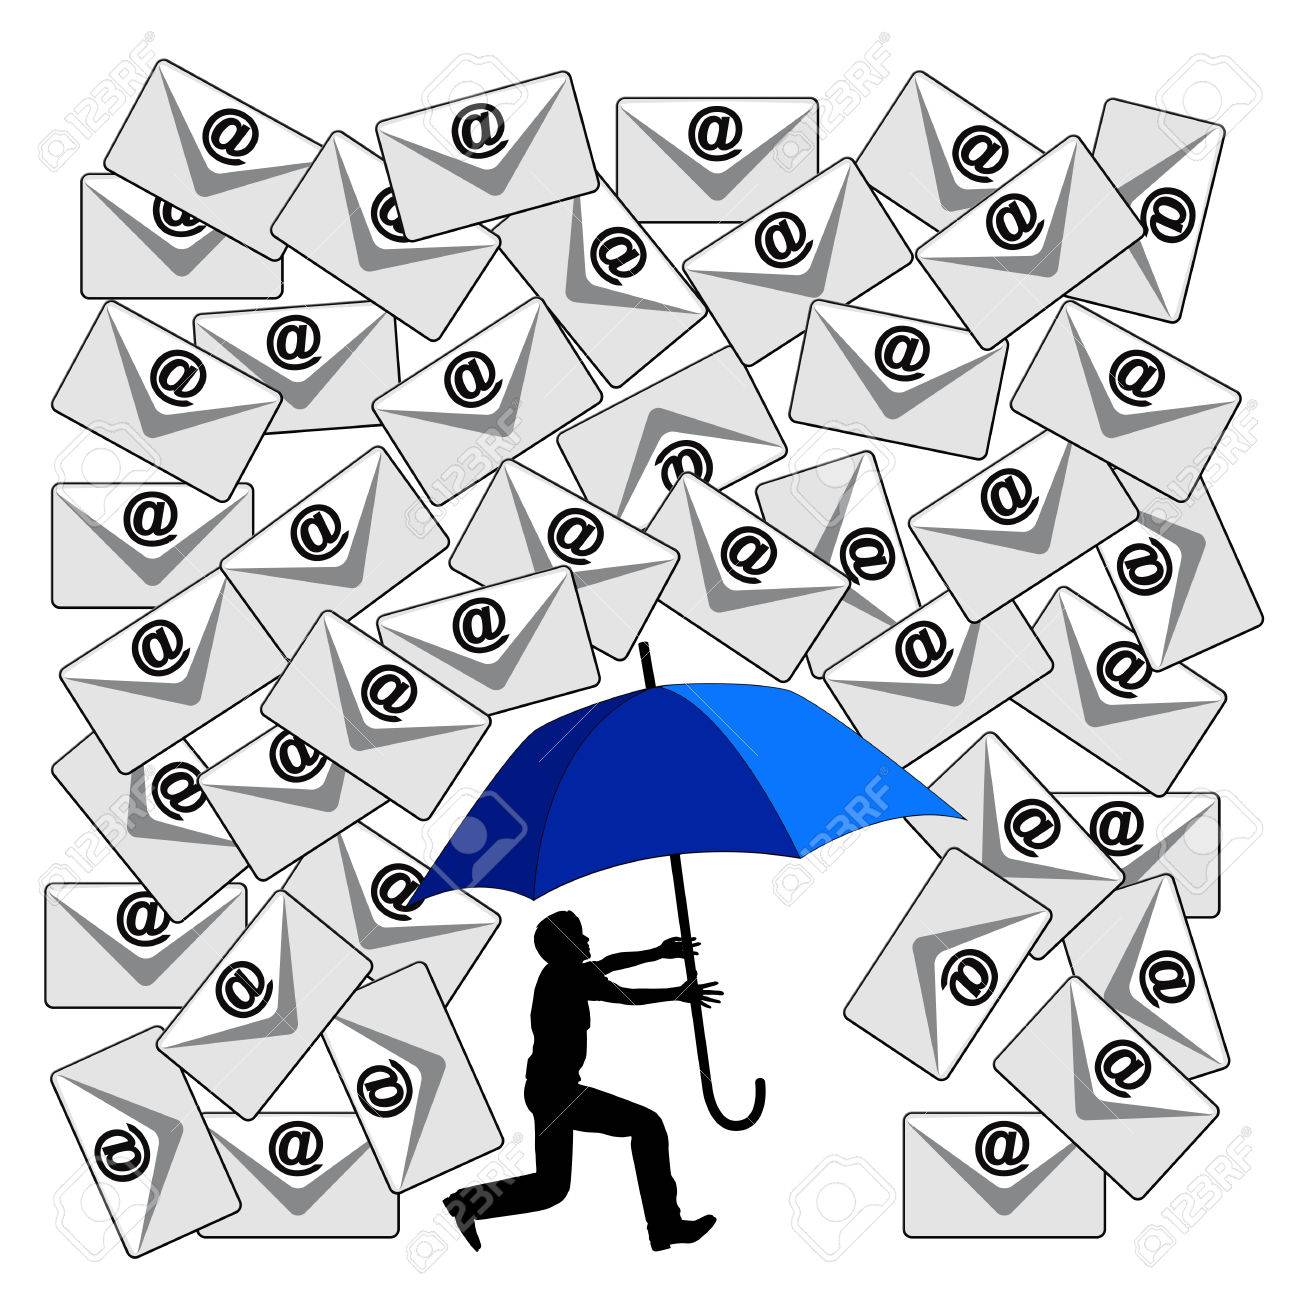 Fighting the Email Flood